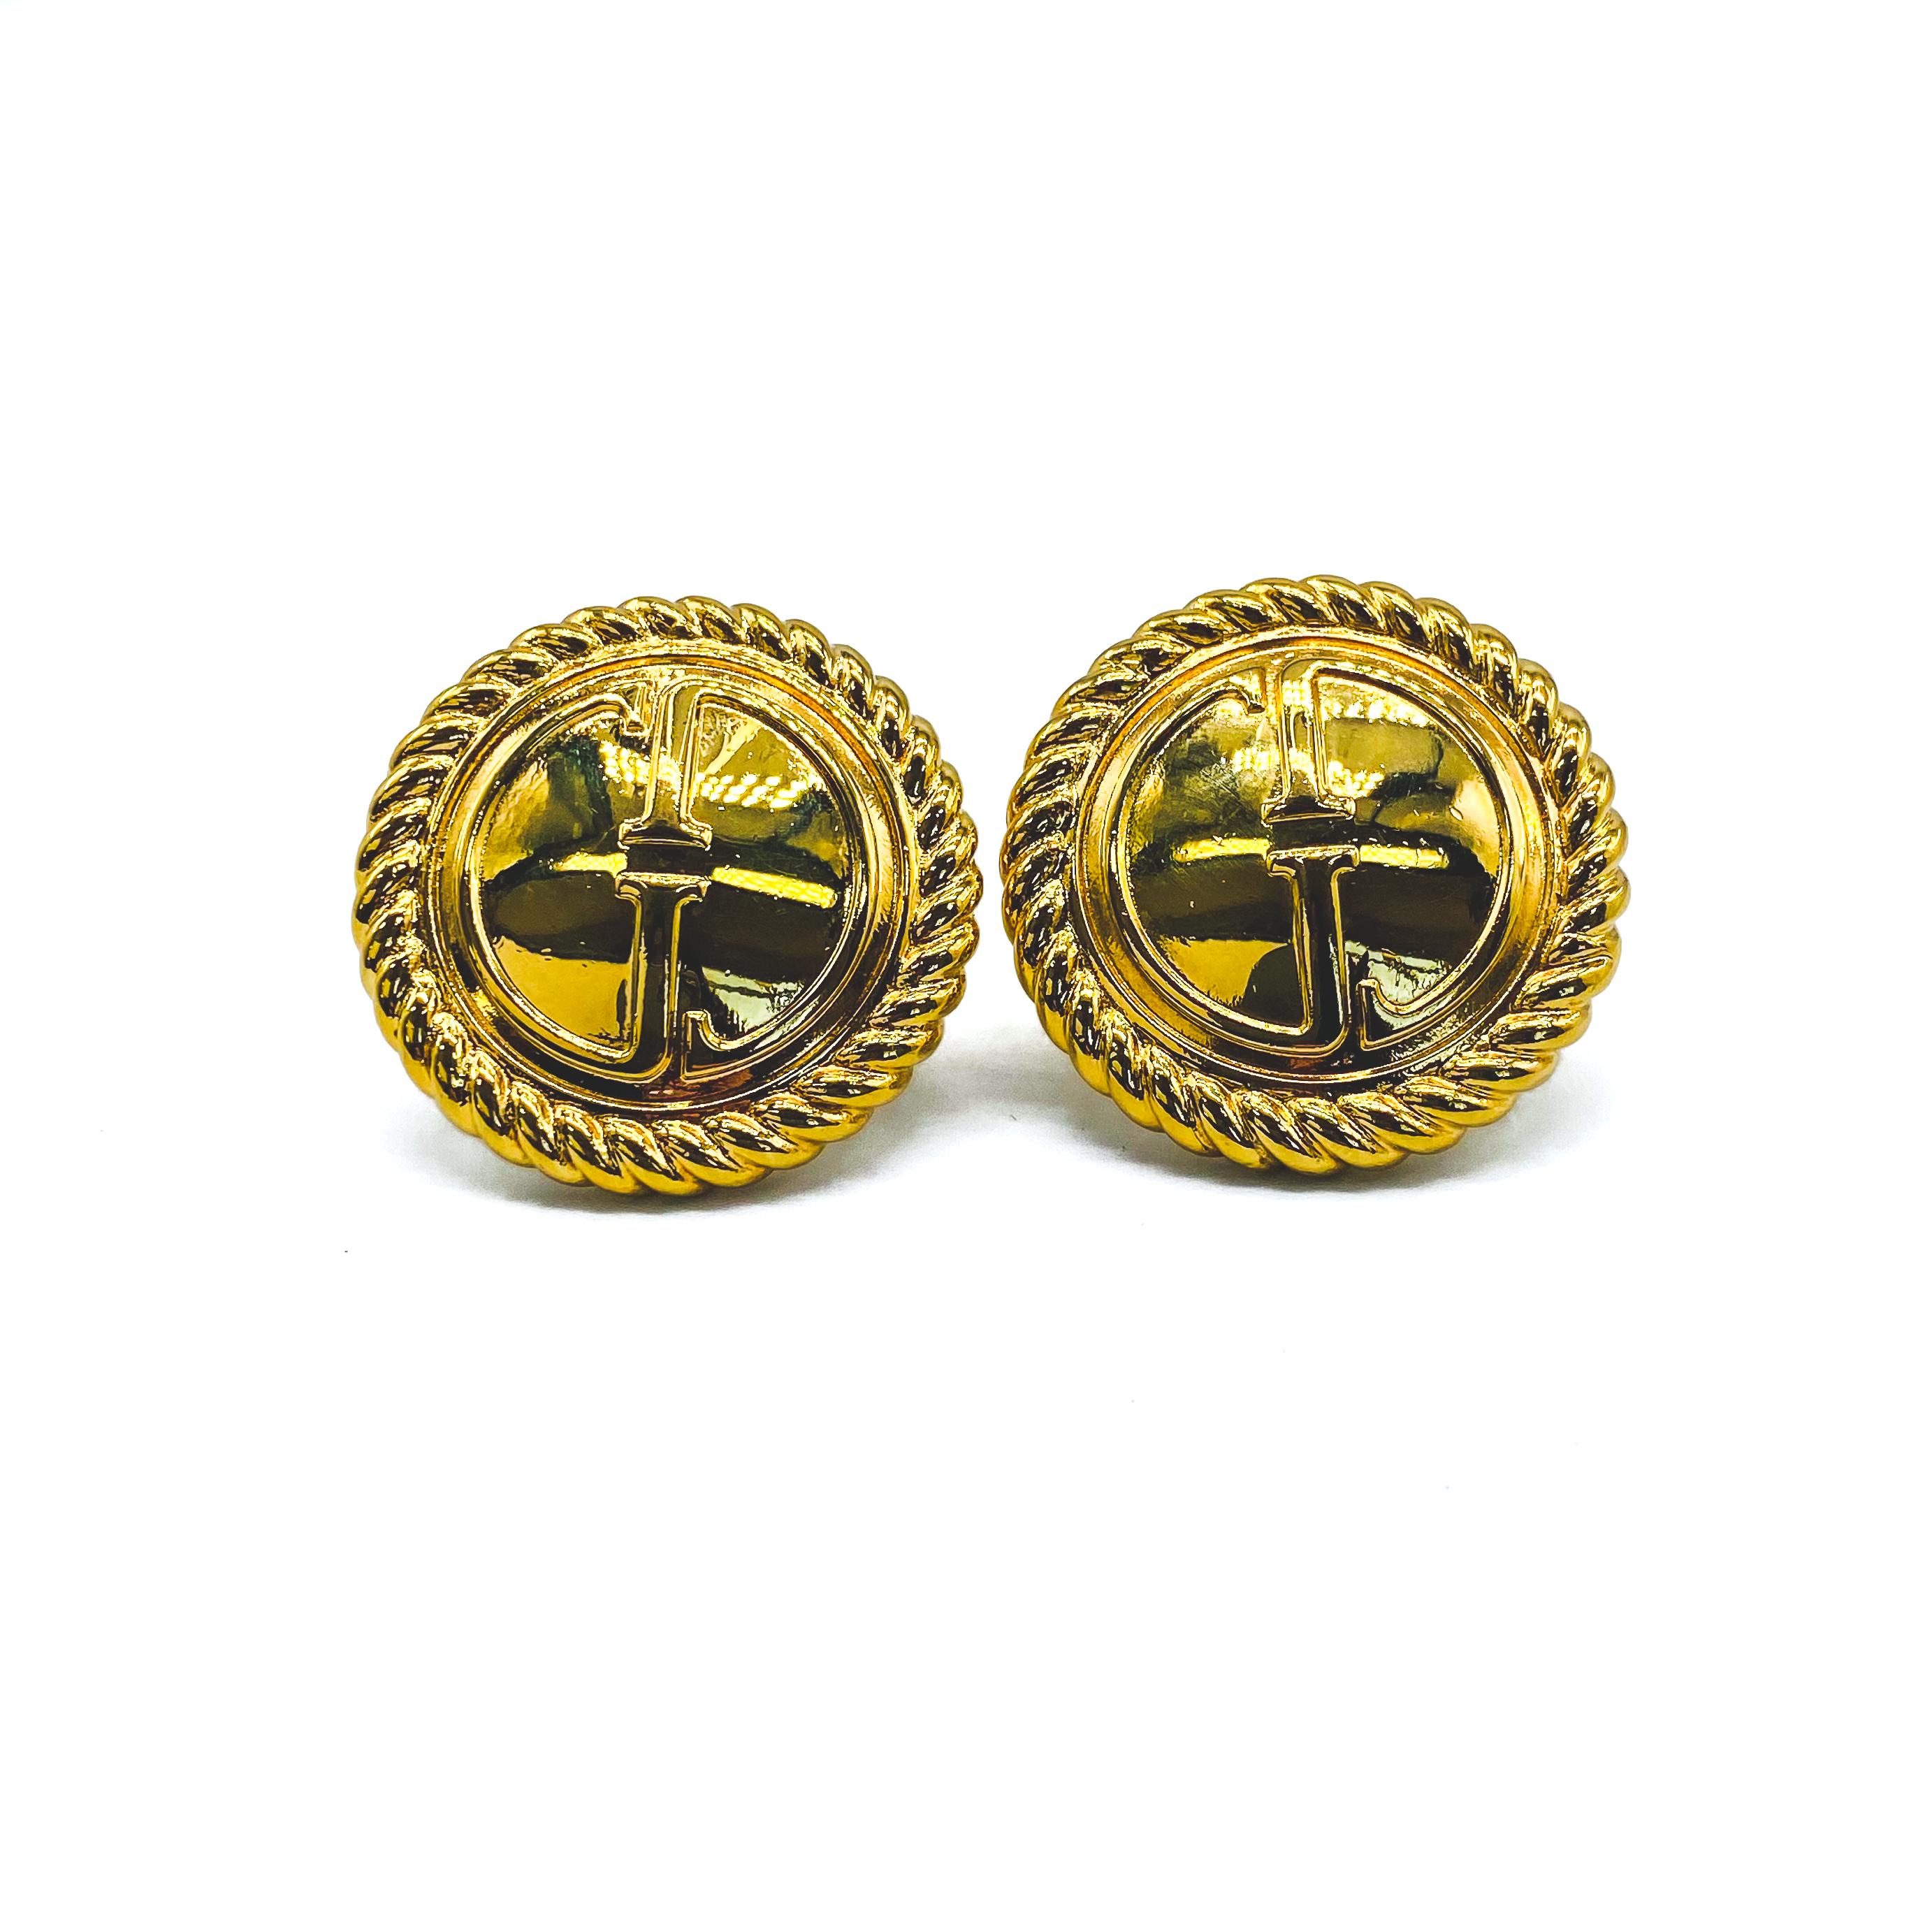 Gucci Vintage 1990s Clip On Earrings

Rare and collectable Tom Ford era GG earrings made for the 1994 collection 

Detail
-Made in Italy in 1994
-Crafted from gold plated metal
-Features the iconic double G logo

Size & Fit
-Measure approx 1.2